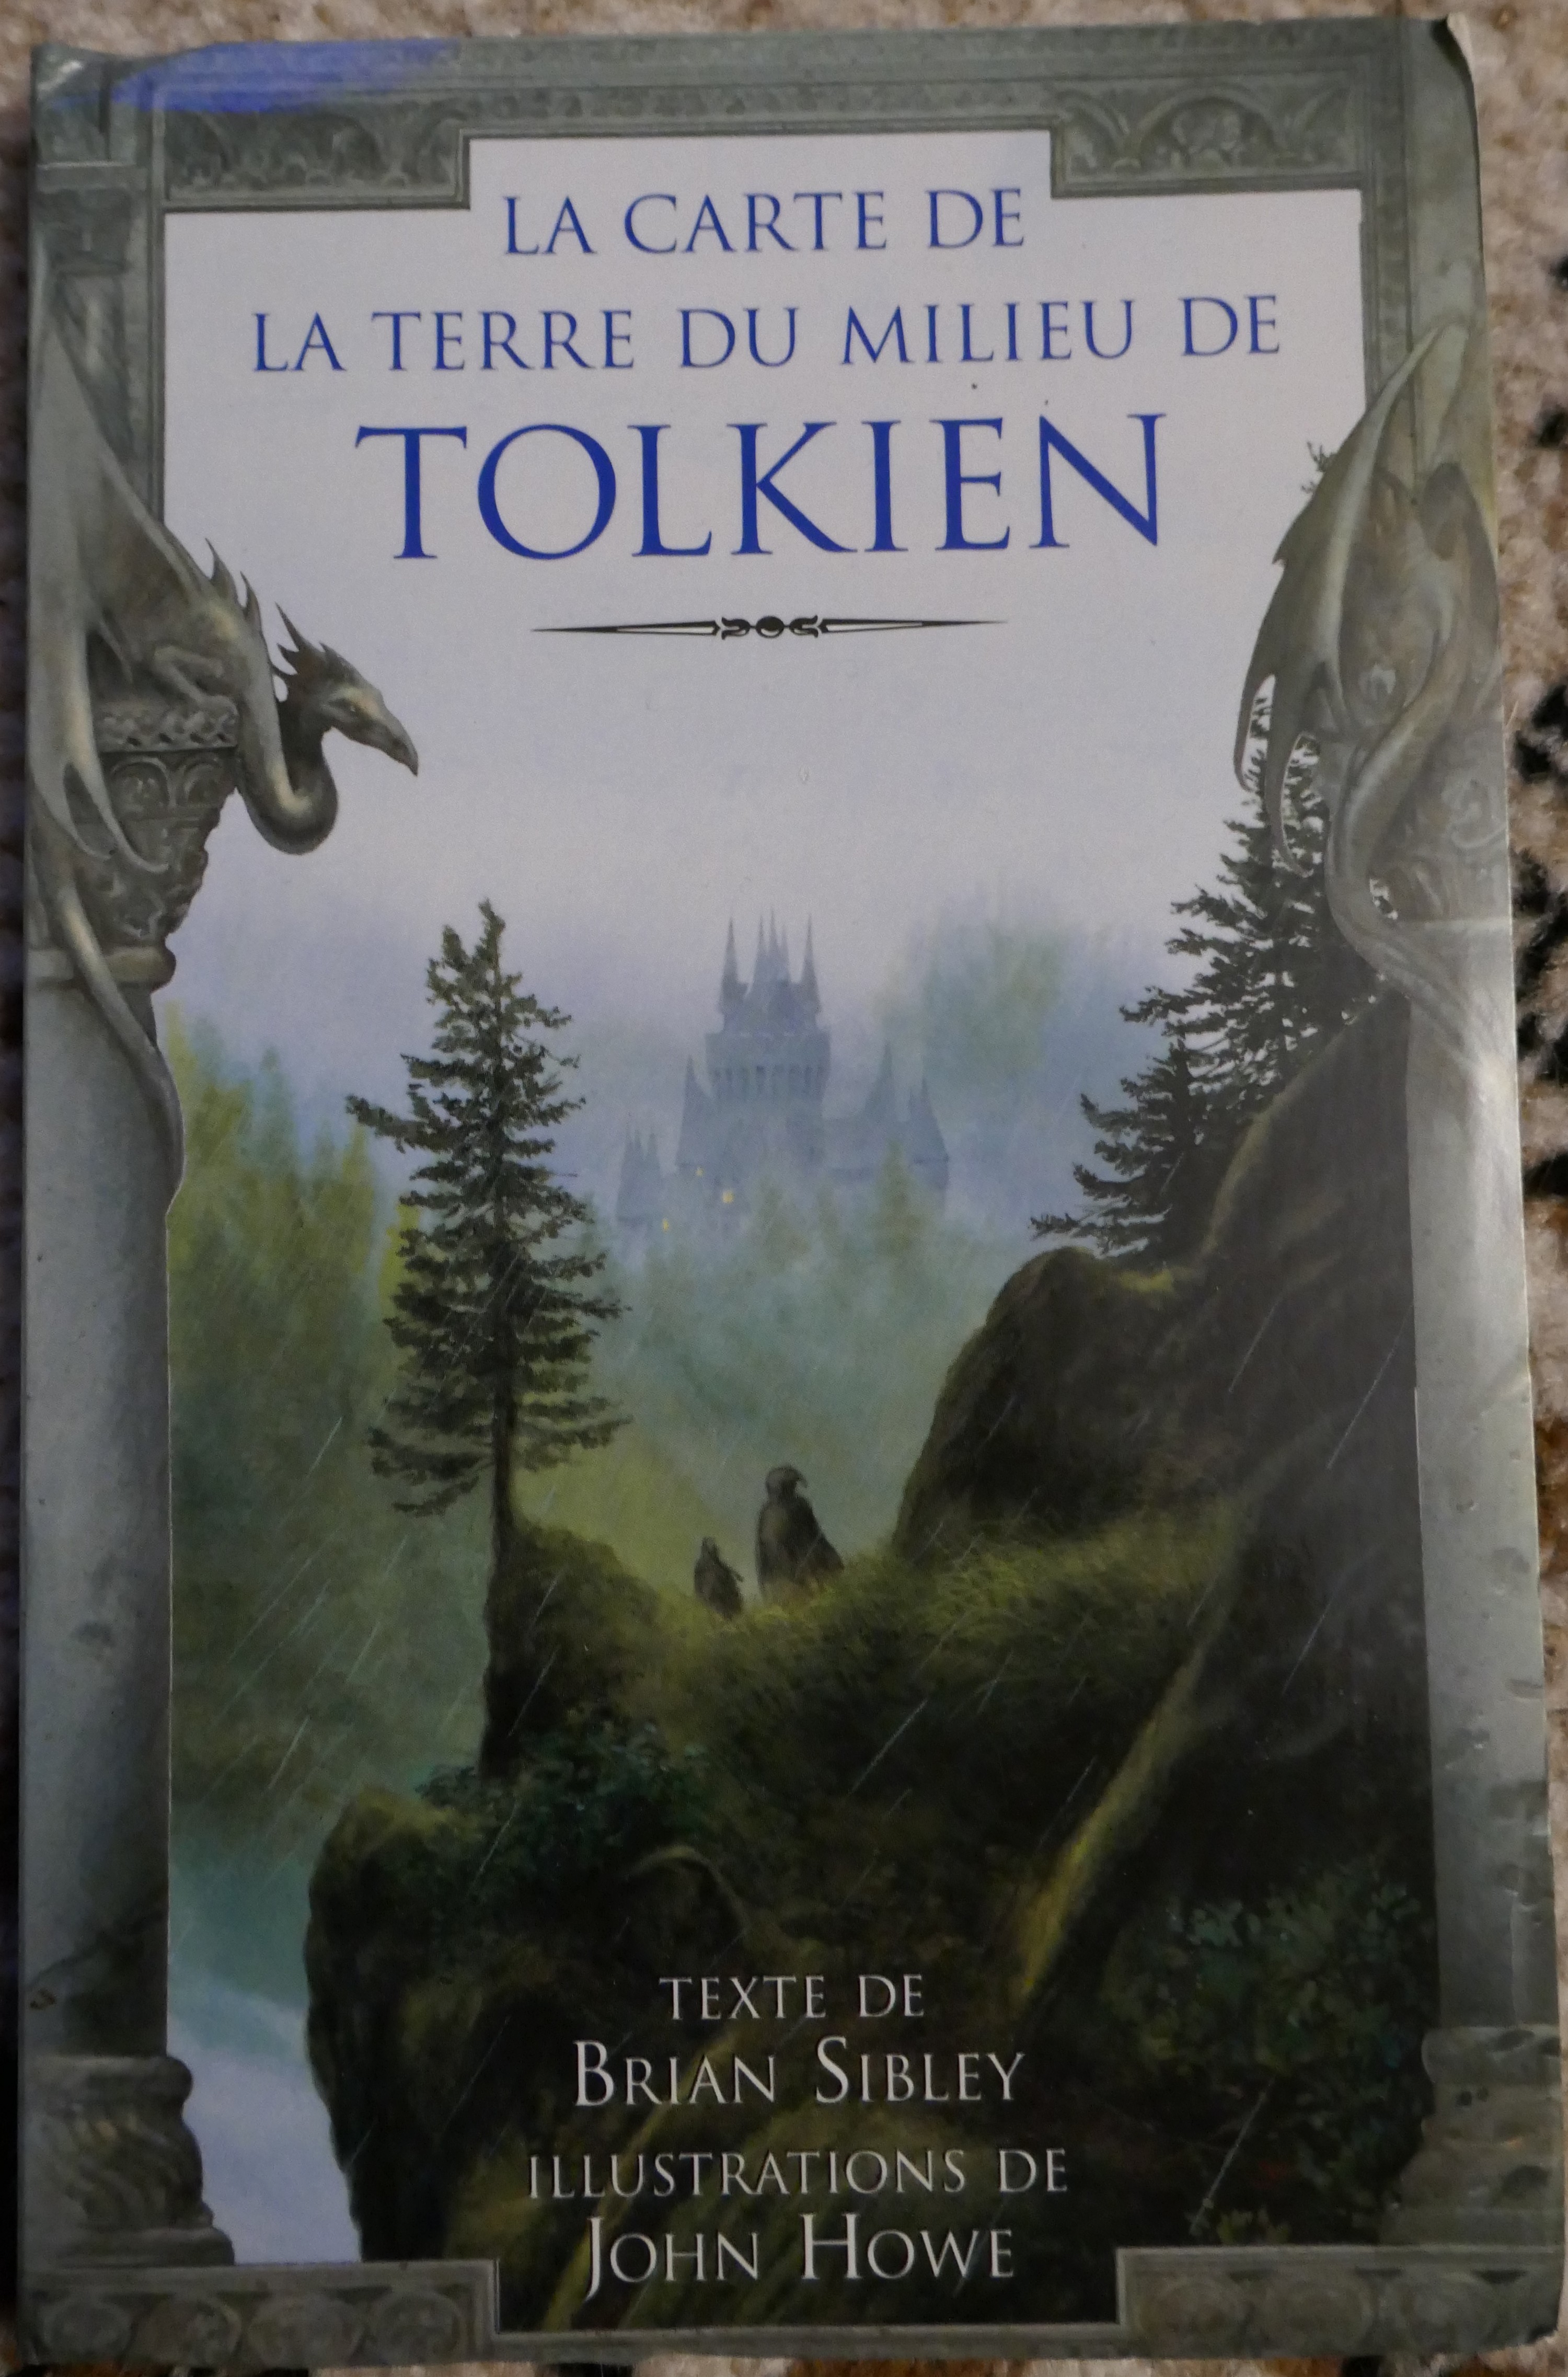 Книги по средиземью. Толкиен книги. Толкин книги. Tolkien Middle Earth книга. Hobbit or there and back again book Cover.